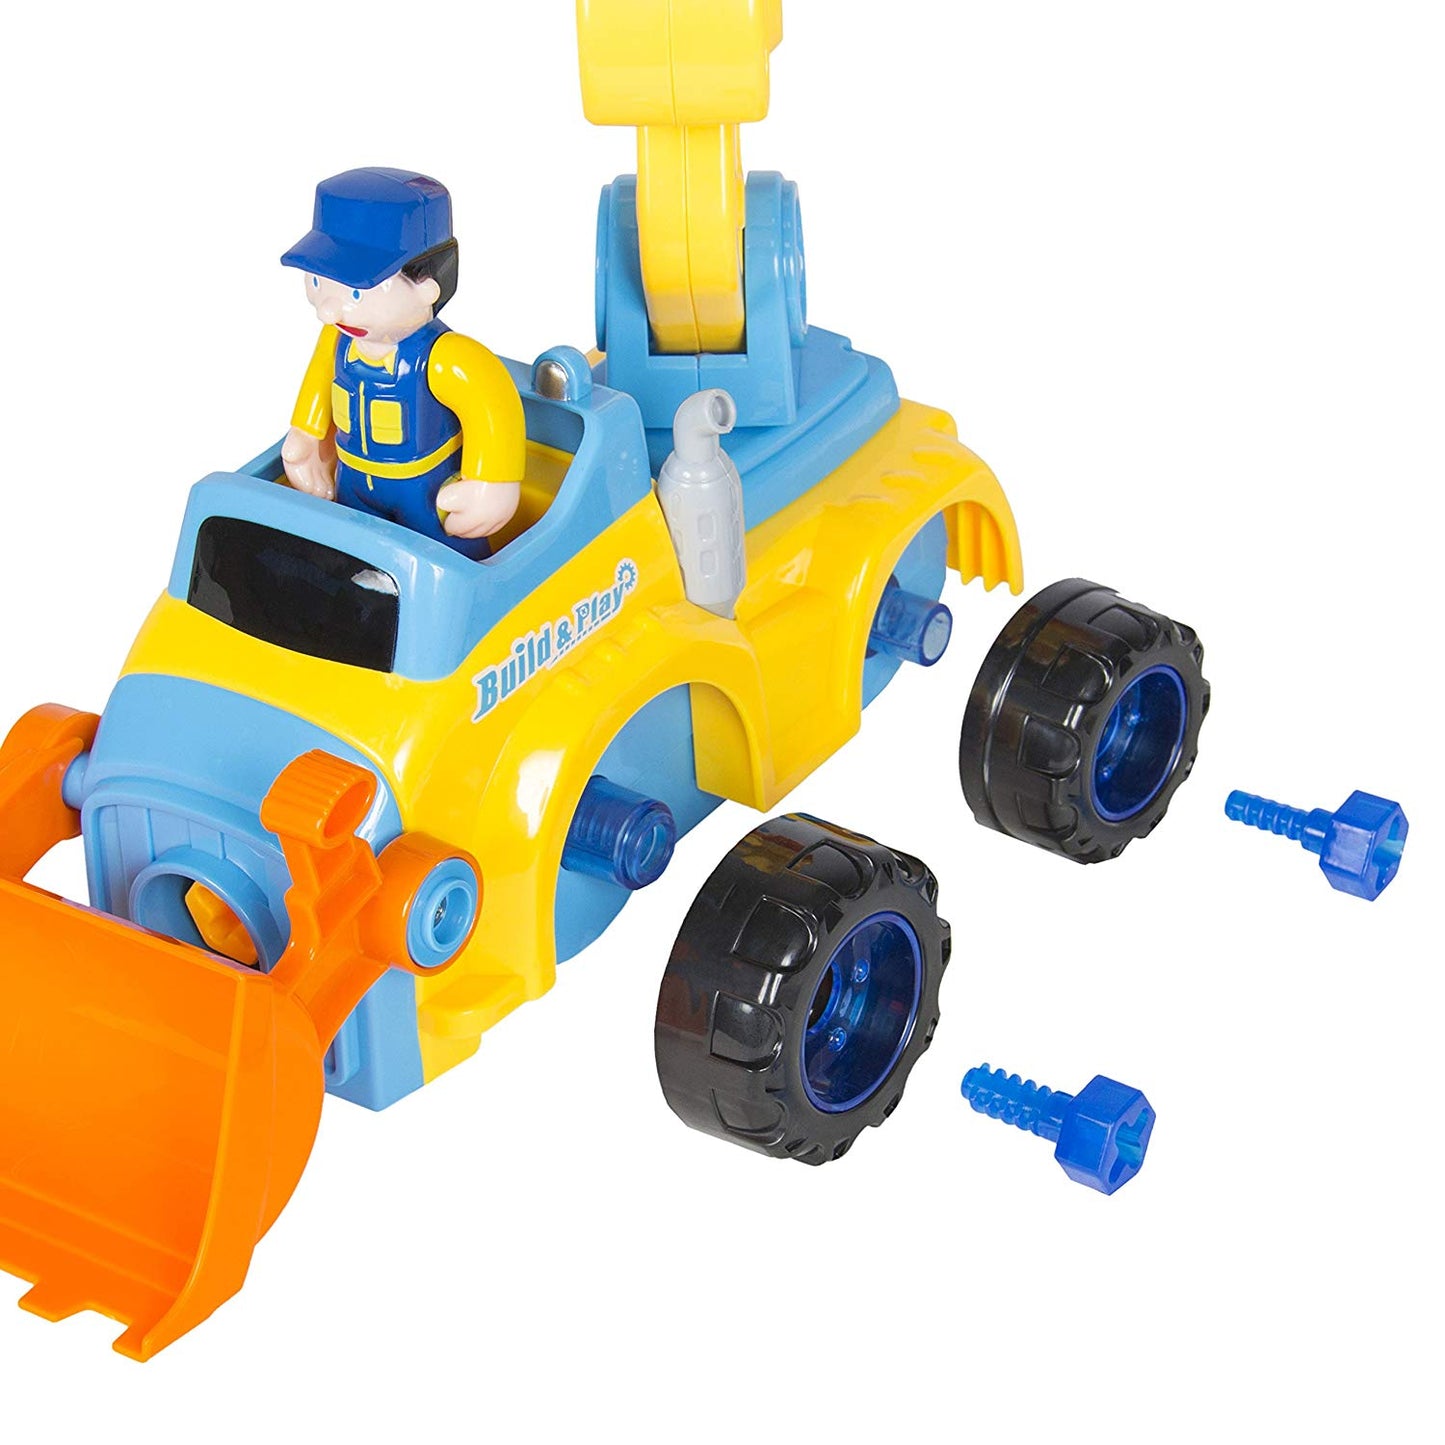 Kids Toy Electronic Construction Bulldozer Excavator Truck w/ Tools, Lights, and Music -Multicolor